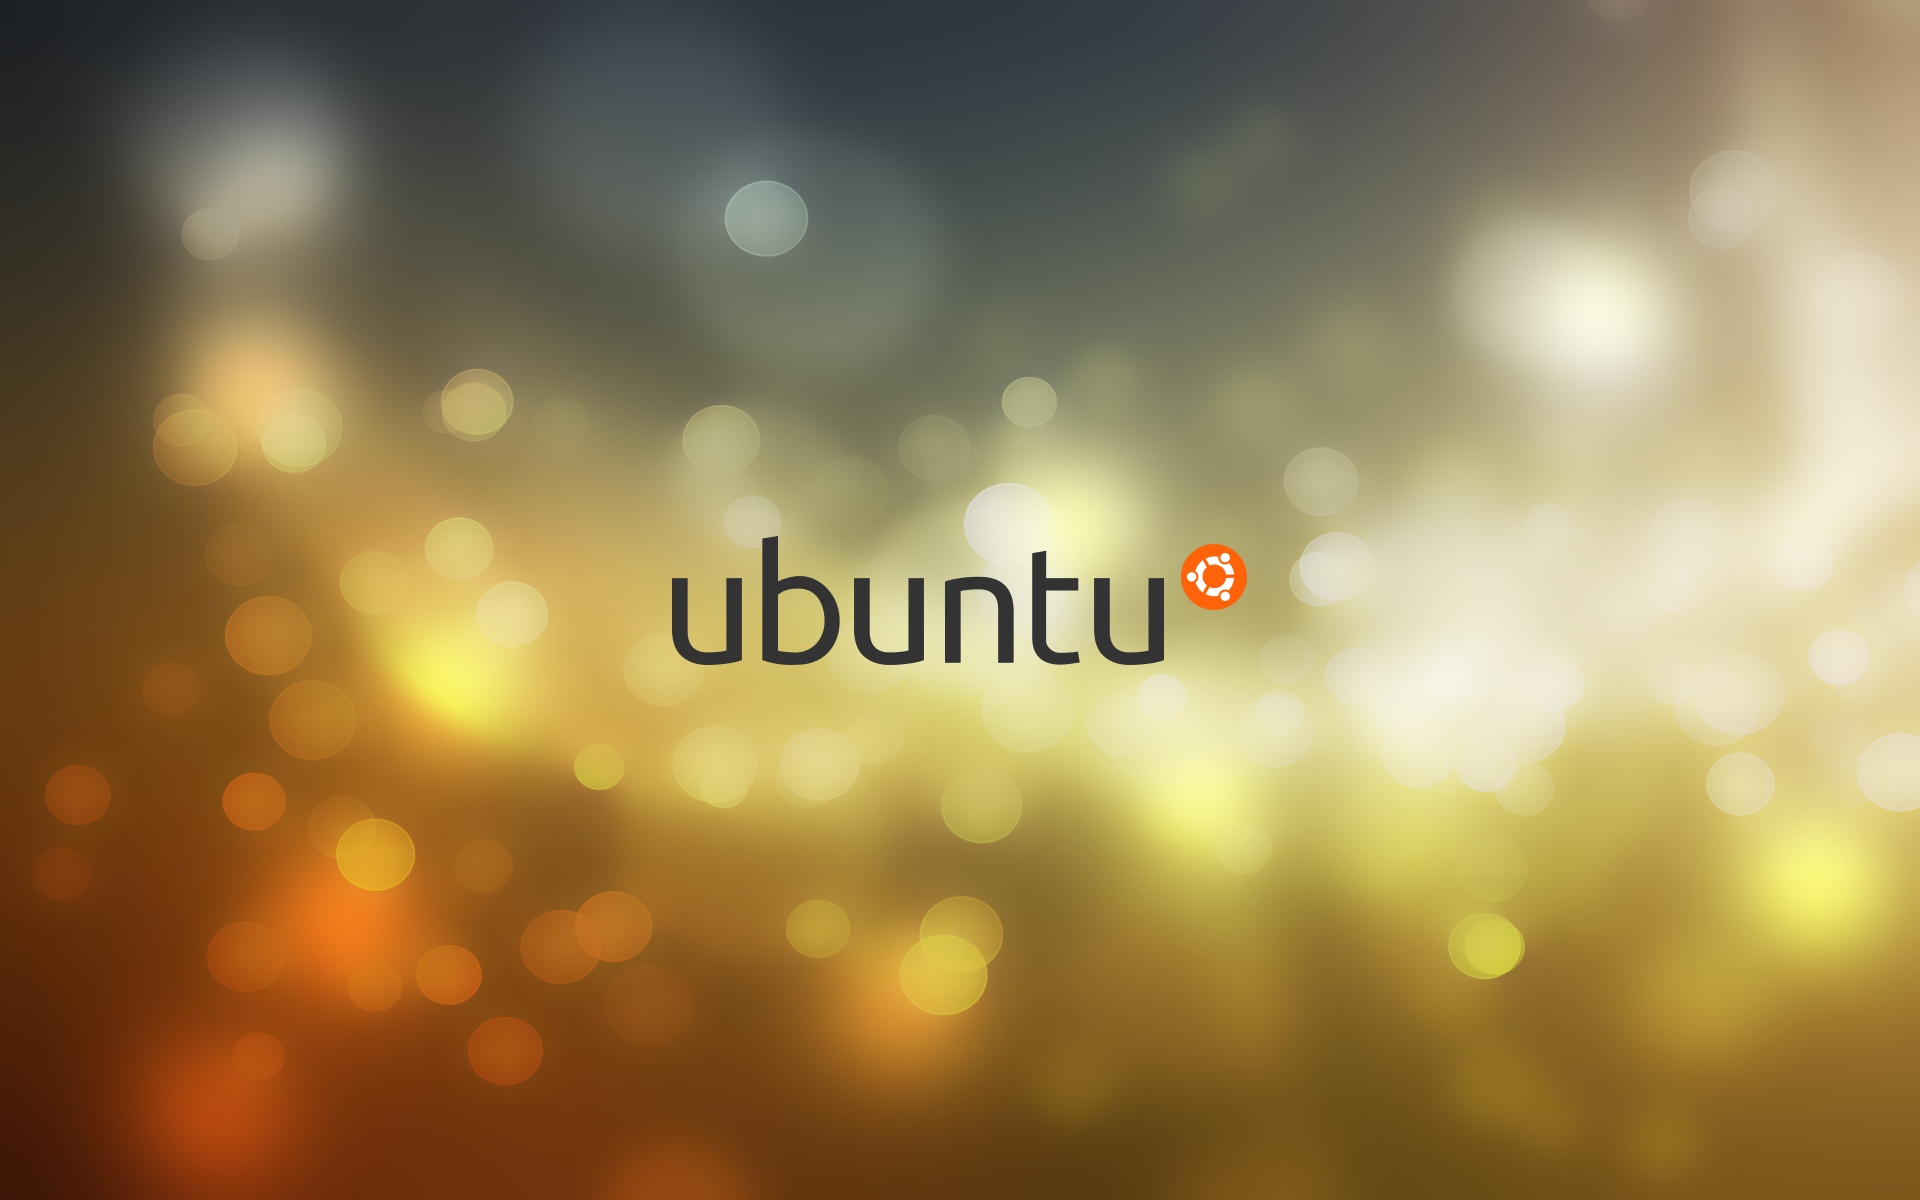 Love Ubuntu Check Out These Amazing Goodies That You Can Buy